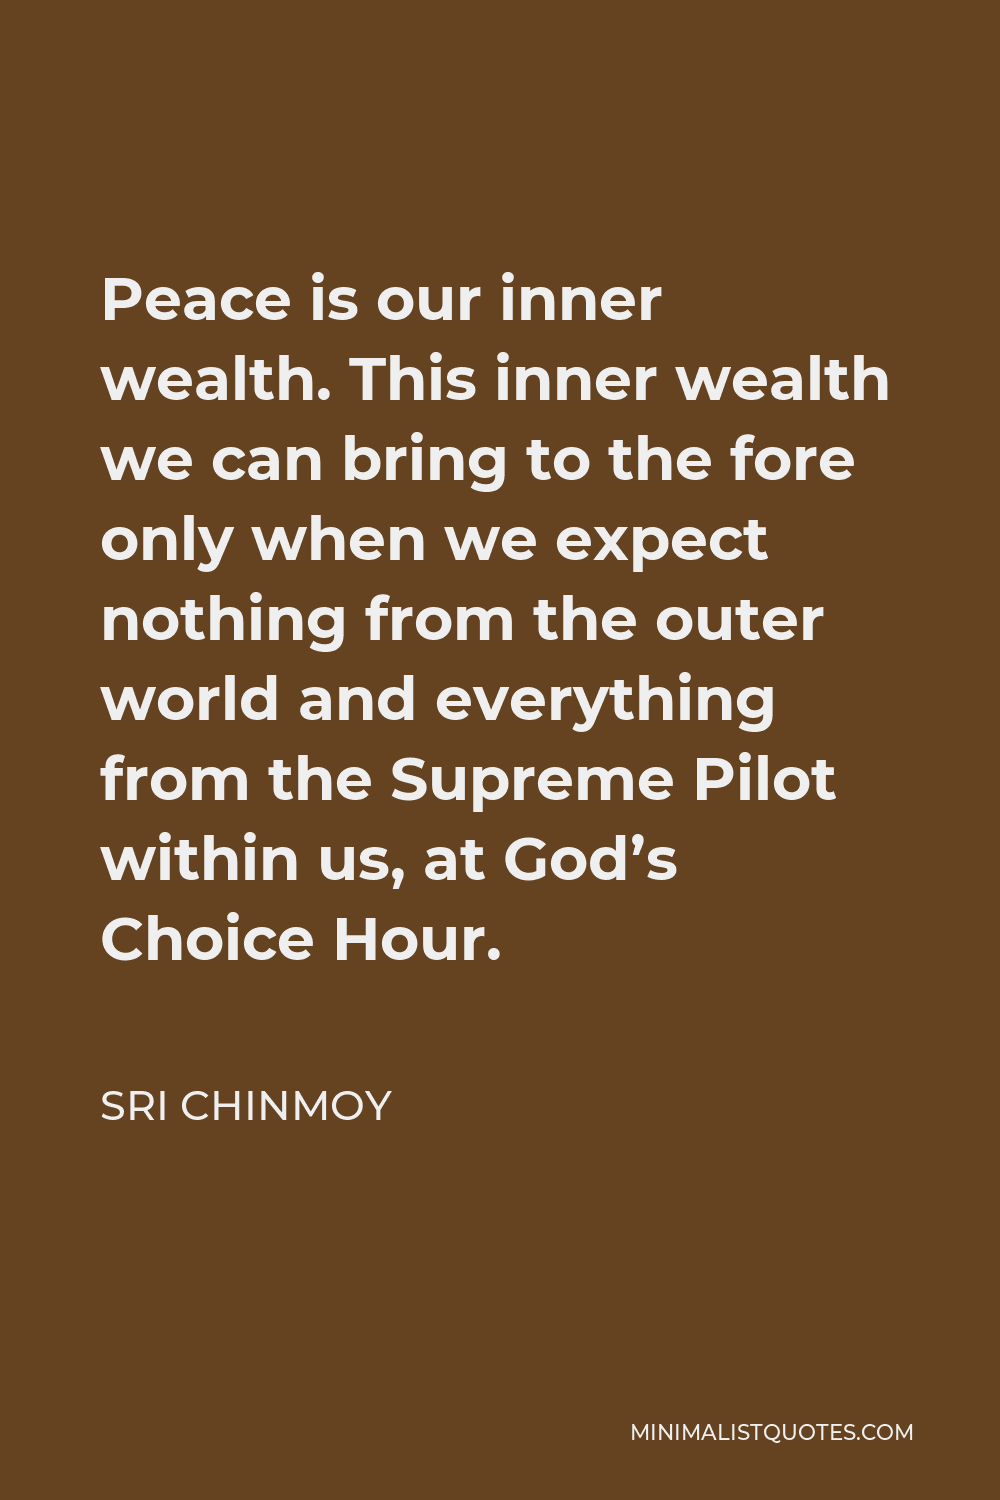 Sri Chinmoy Quote - Peace is our inner wealth. This inner wealth we can bring to the fore only when we expect nothing from the outer world and everything from the Supreme Pilot within us, at God’s Choice Hour.